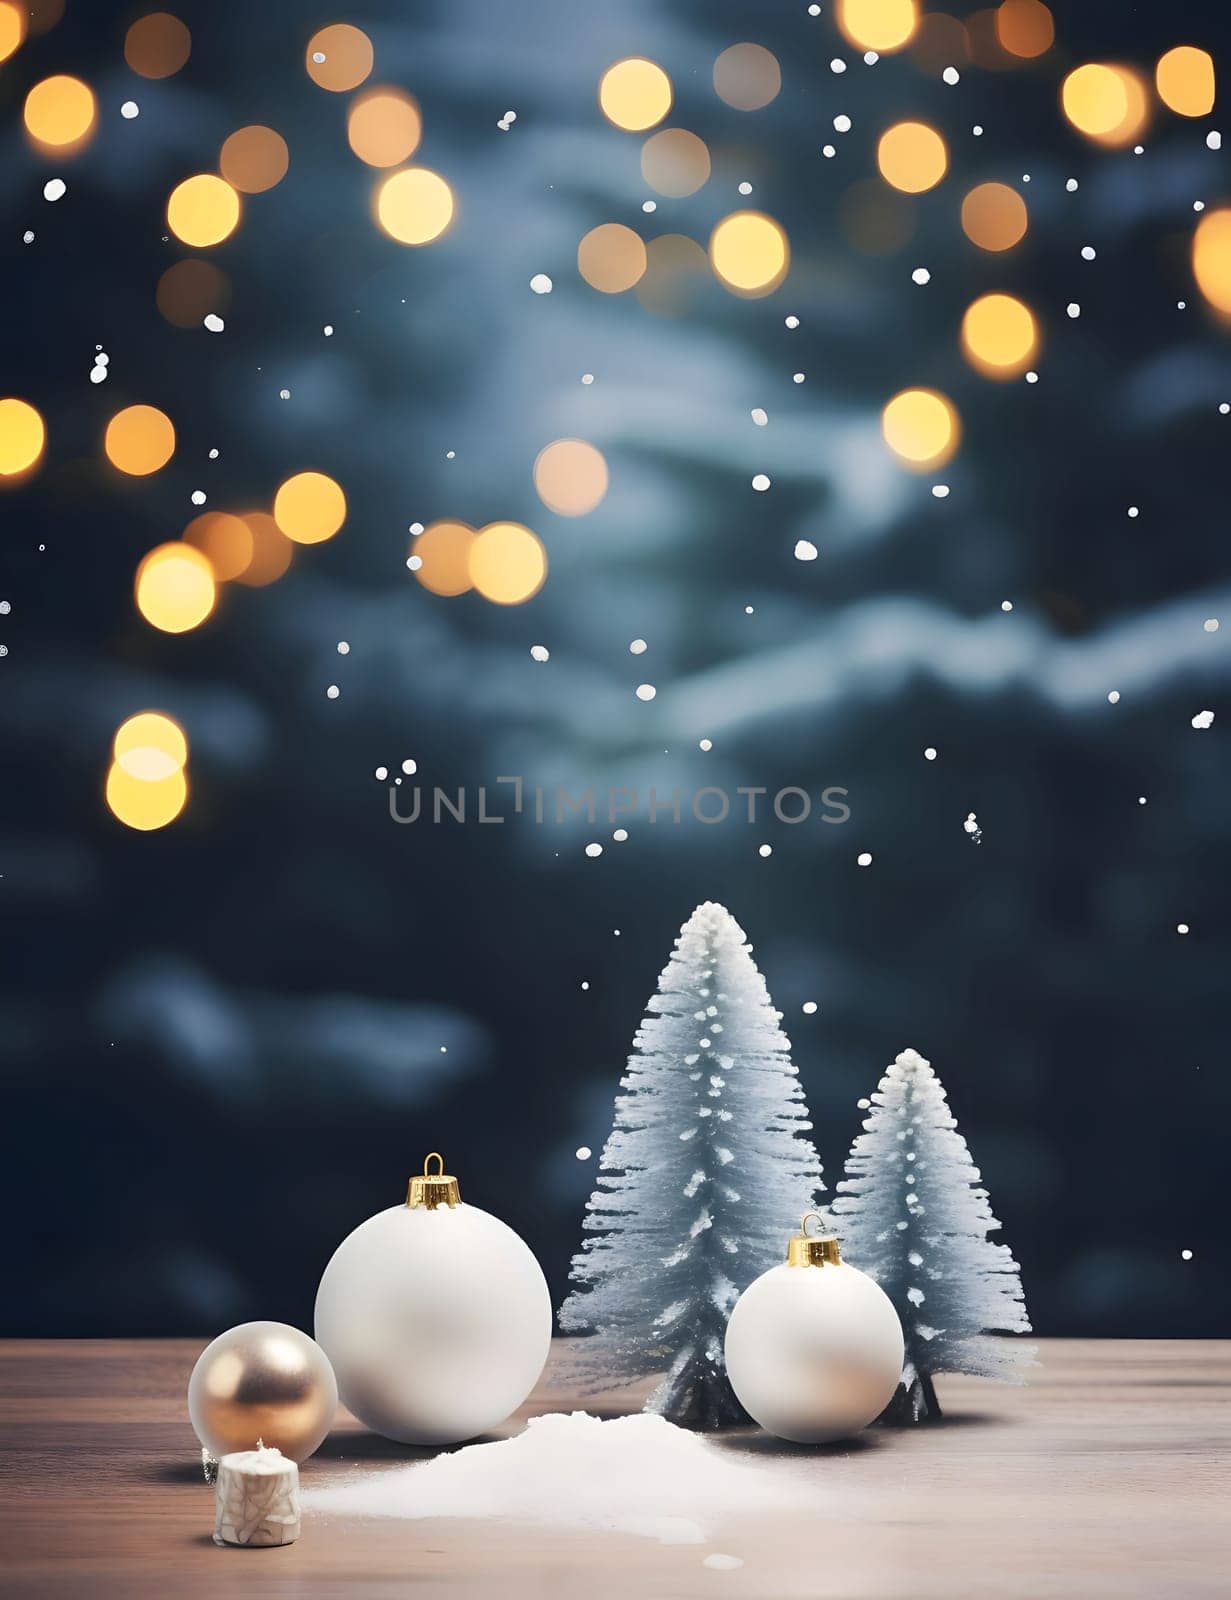 Tiny Christmas trees and baubles on a wooden top at the bottom. In the background falling snow and bokeh effect.Christmas banner with space for your own content. Blank field for your inscription.